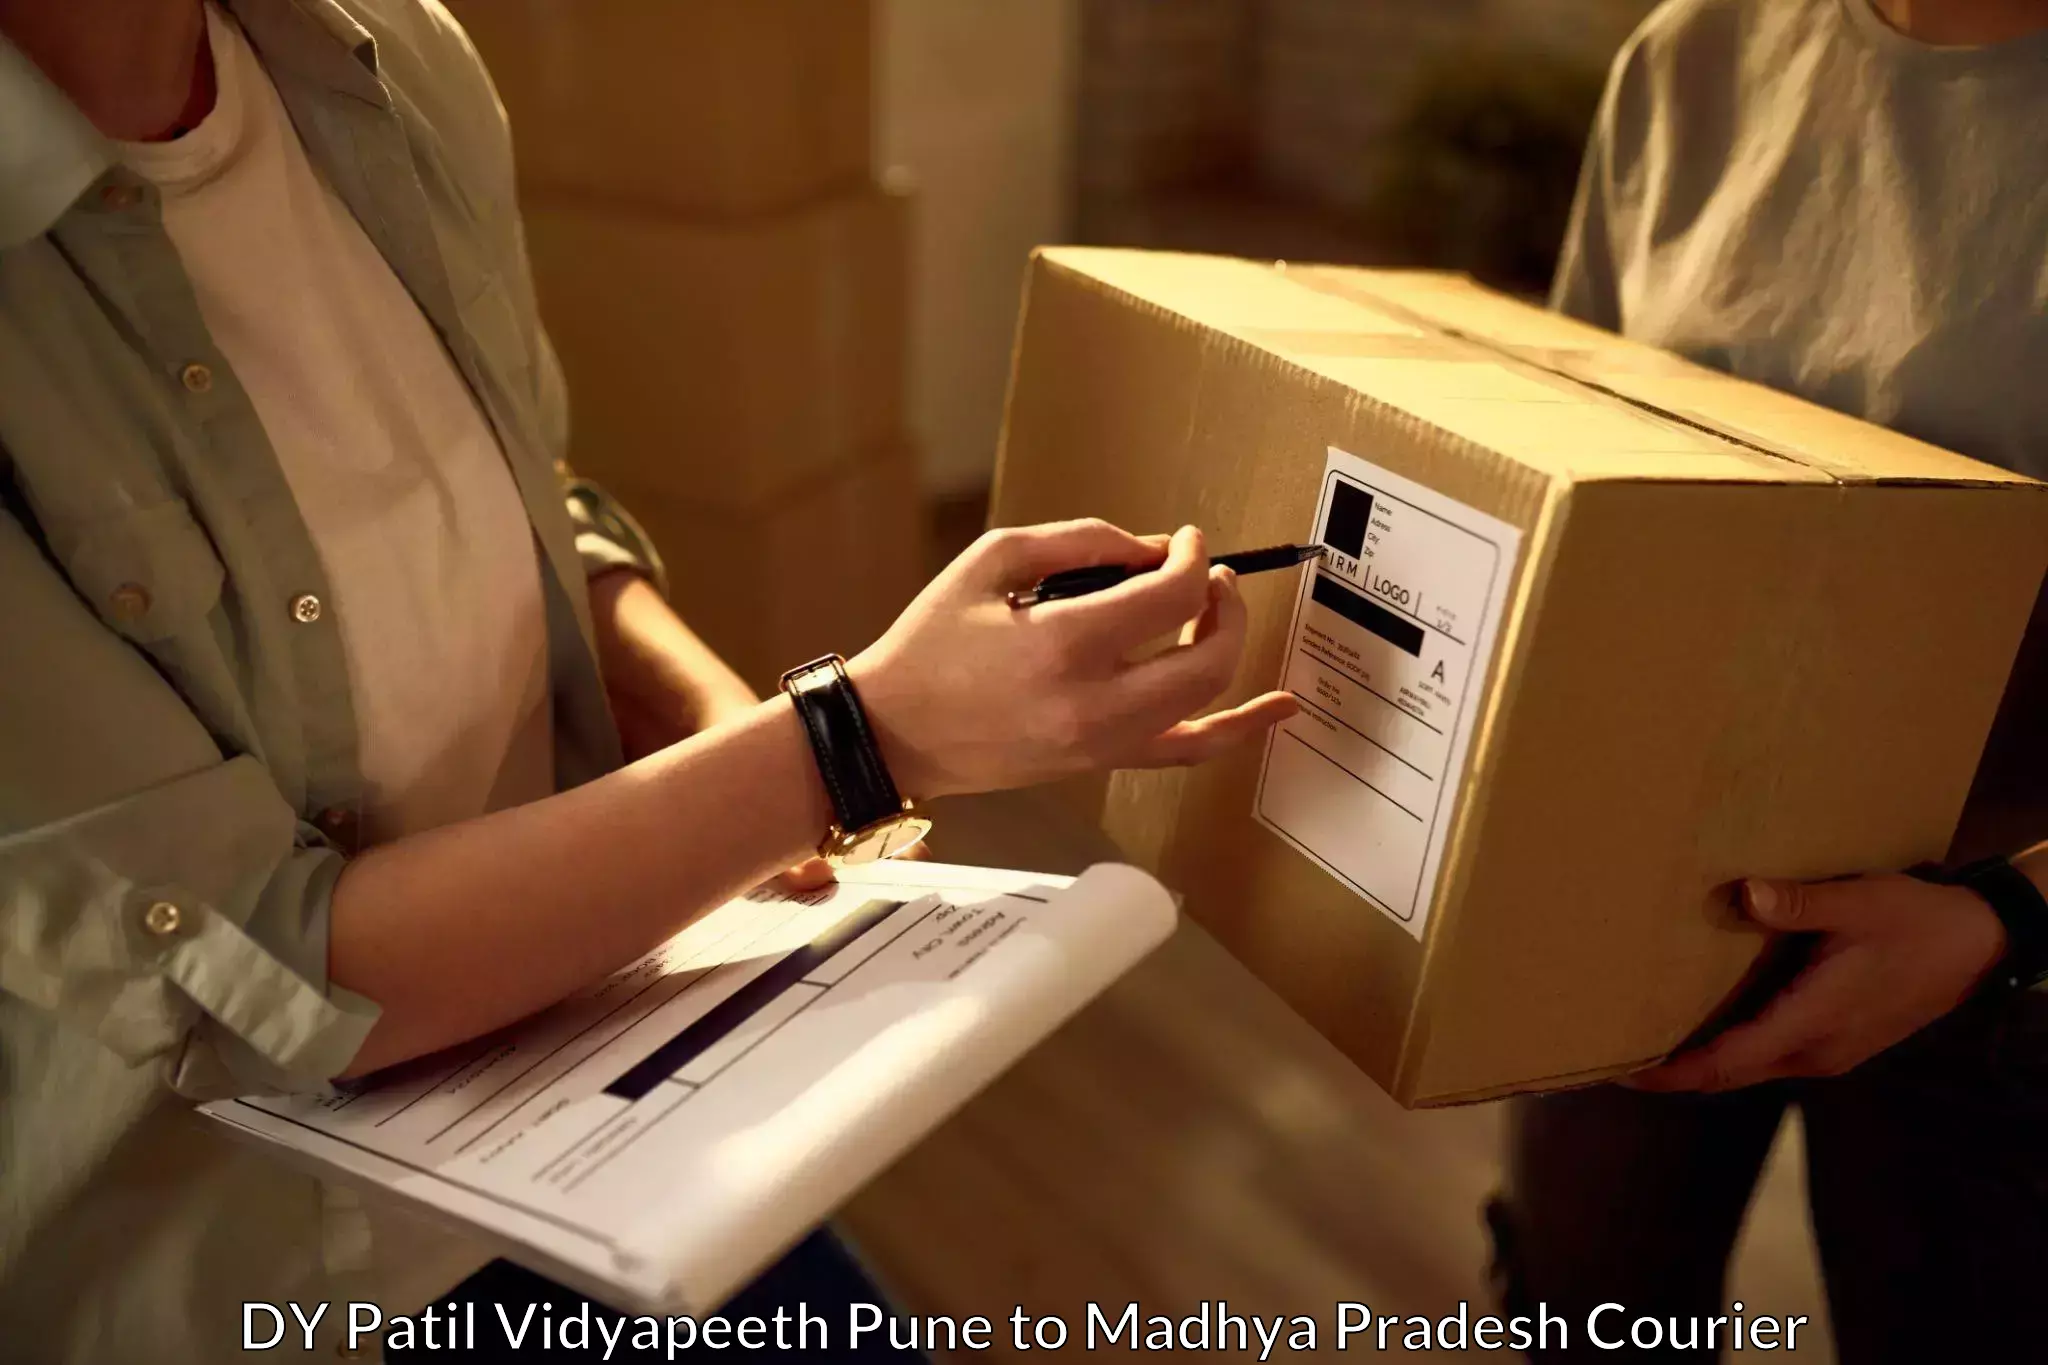 Residential courier service DY Patil Vidyapeeth Pune to Niwari